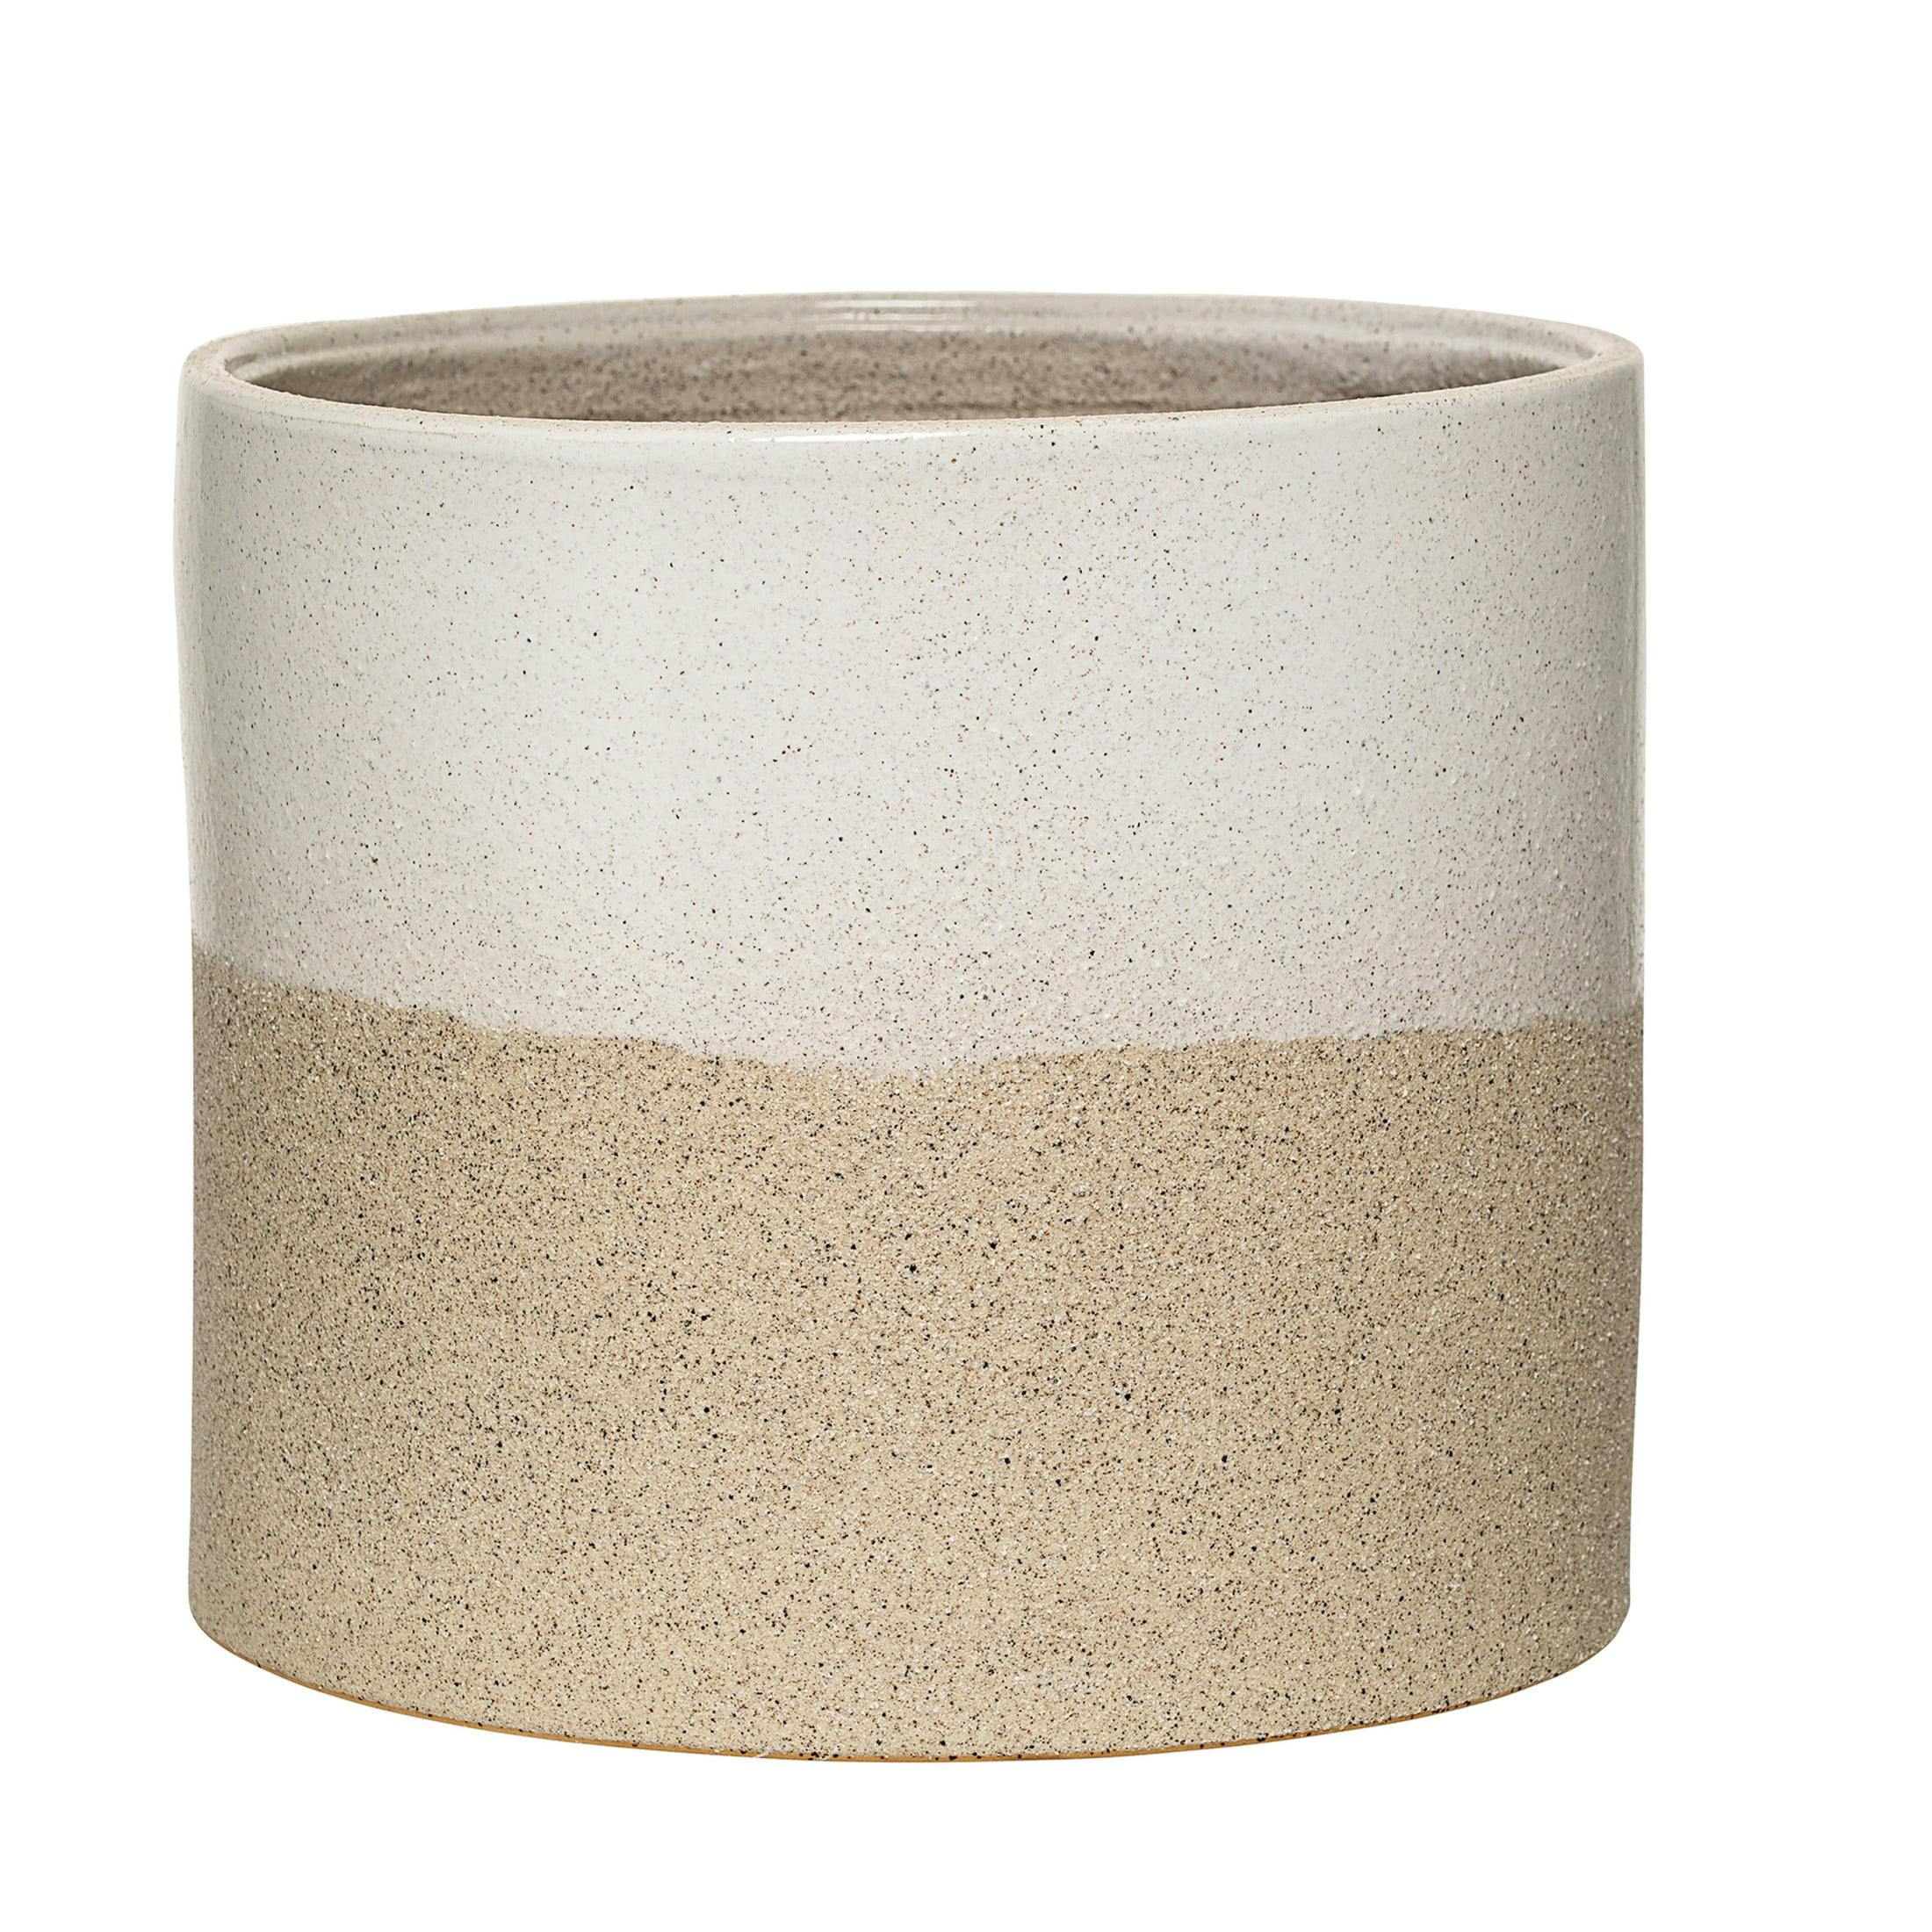 Juliana Speckled Natural and White Ceramic Round Planter